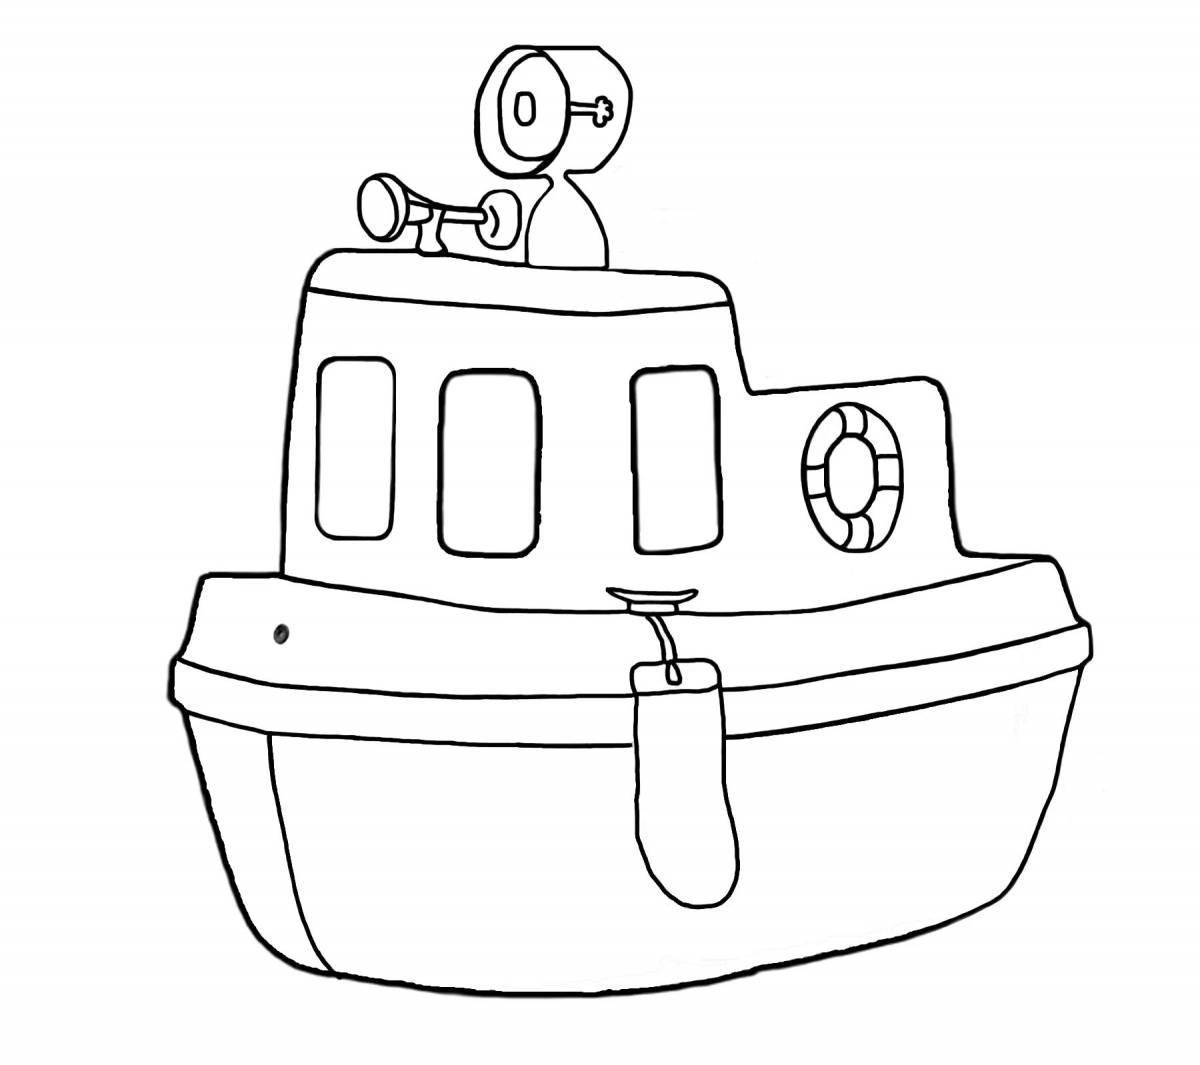 Coloring book innovative water transport